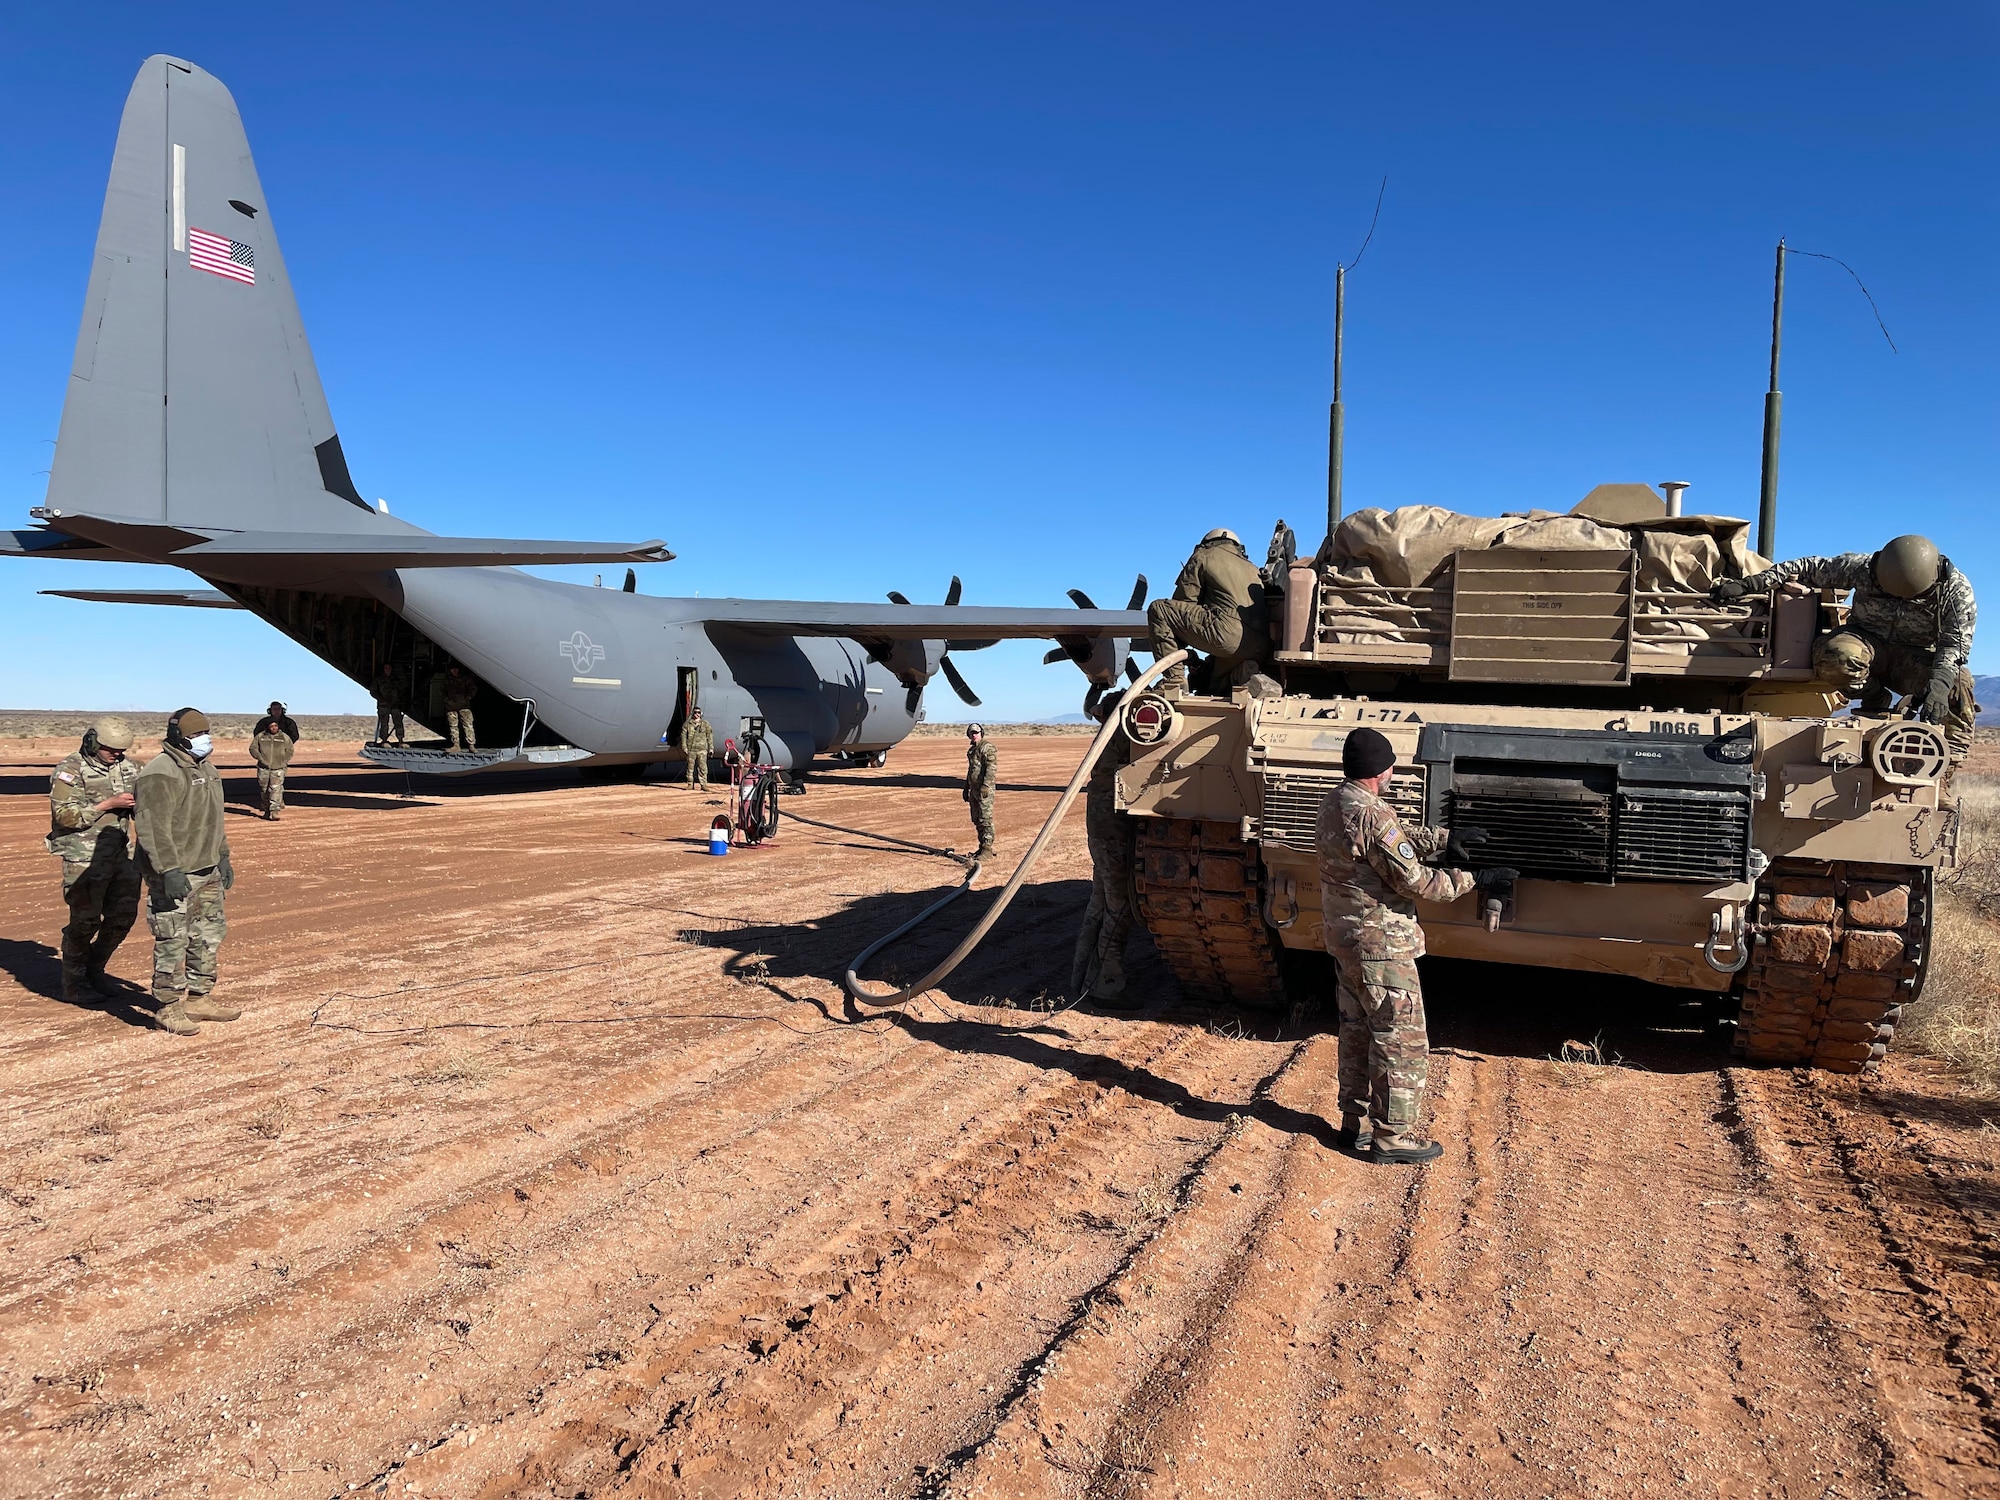 U.S. Air Force Airmen assigned to the 317th Airlift Wing and U.S. Army Soldiers assigned to the 1st Armored Division run a fuel hose from a C-130J Super Hercules to an M1A2 Tank at Fort Bliss, Texas, Jan. 25, 2023. The 317th AW executed an Agile Combat Employment exercise by sending a C-130 to the Fort Bliss Range to perform Specialized Fueling Operations with the 3rd Brigade Combat Team, 1st AD and the 1st Battalion, 77th Armored Regiment. The units successfully passed fuel from a C-130 to an M1A2 Abrams Tank utilizing an Emergency Response Refueling Equipment Kit, marking the first time in Air Force history that a C-130 has been used to refuel an Abrams tank. (Courtesy photo)